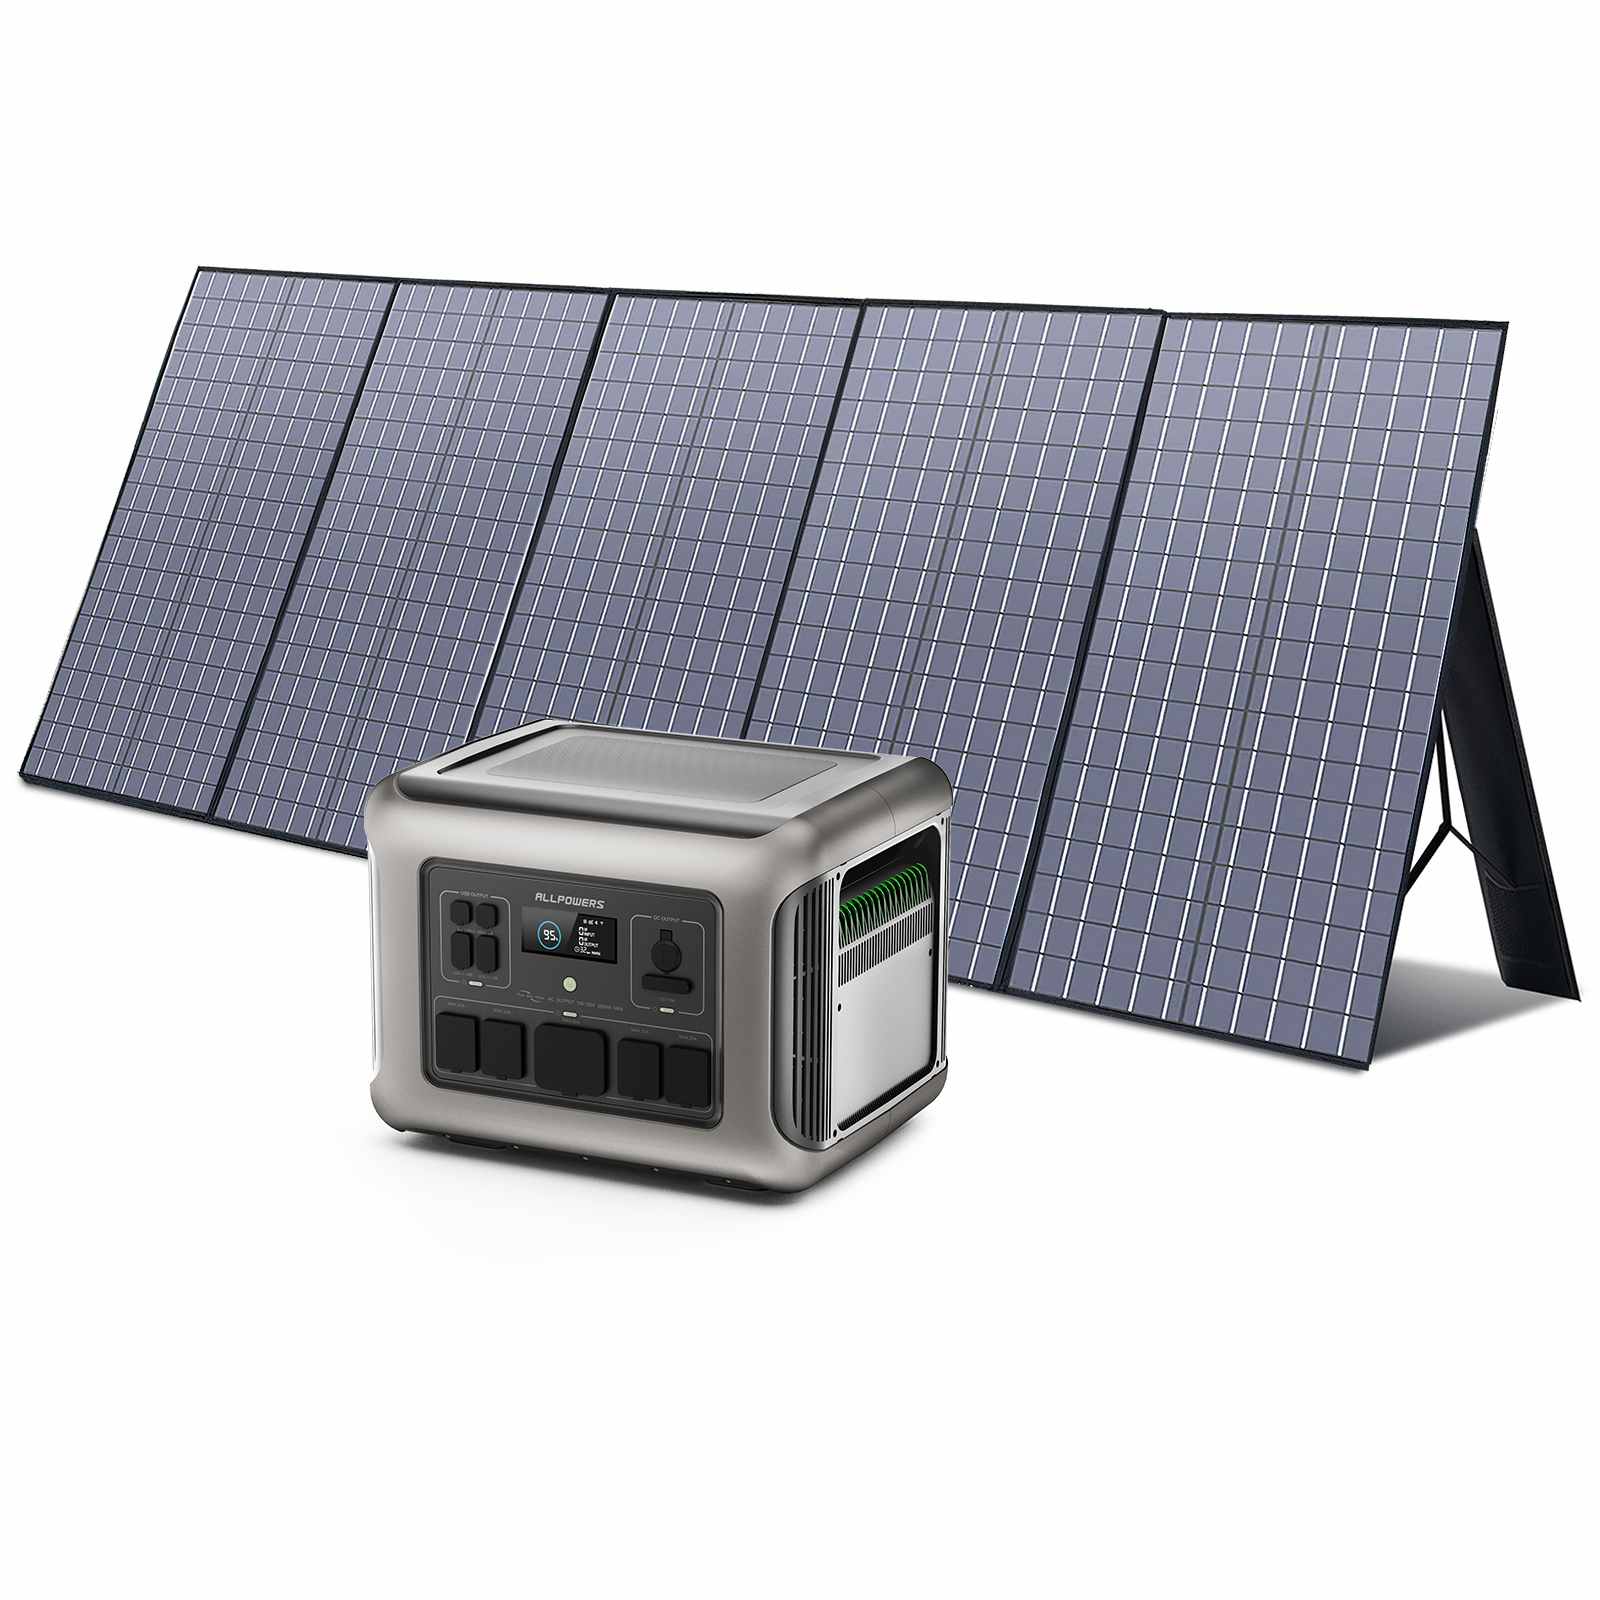 ALLPOWERS R1500 Portable Home Backup Power Station 1800W 1152Wh LiFeP04  Battery